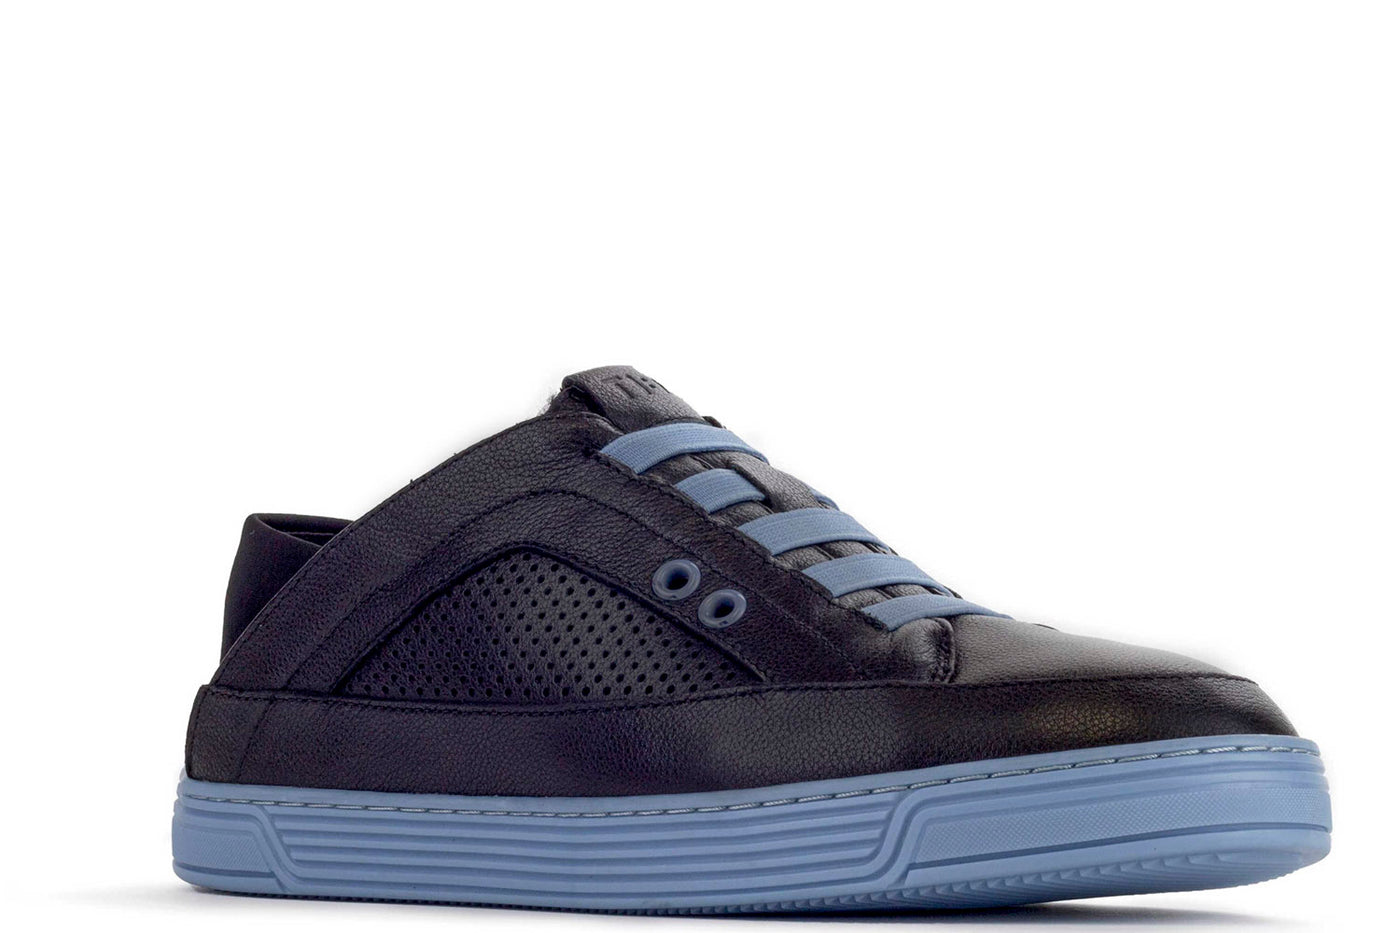 Men's Low-top Slippers-TIME Slippers #color_leather-black-sky-blue